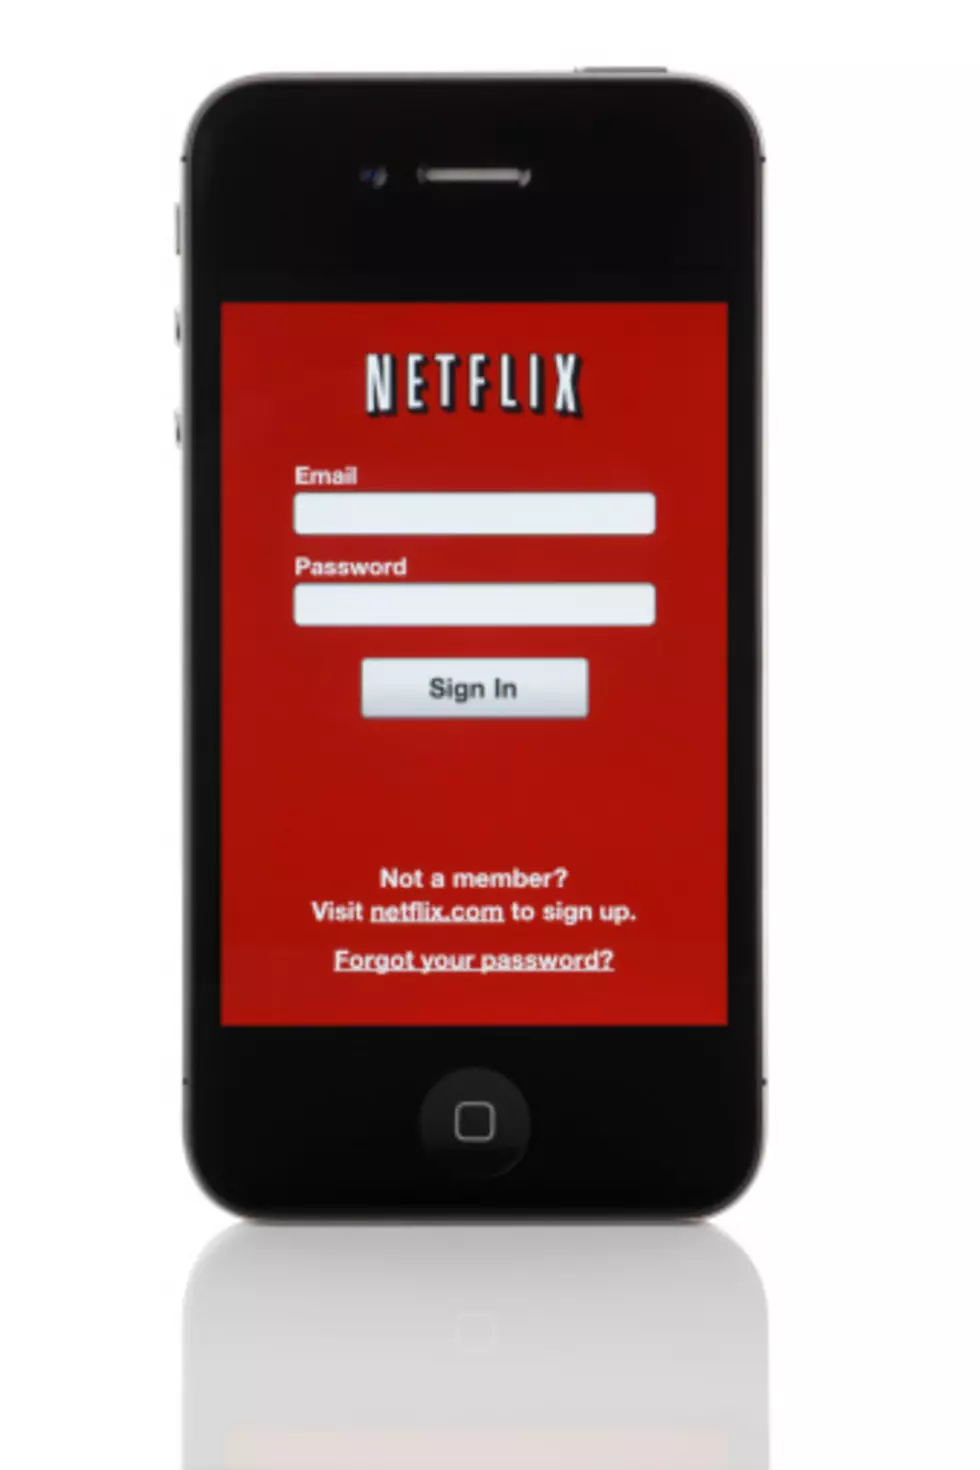 Illinois Netflix Users: Free Password Sharing Is Coming To An End